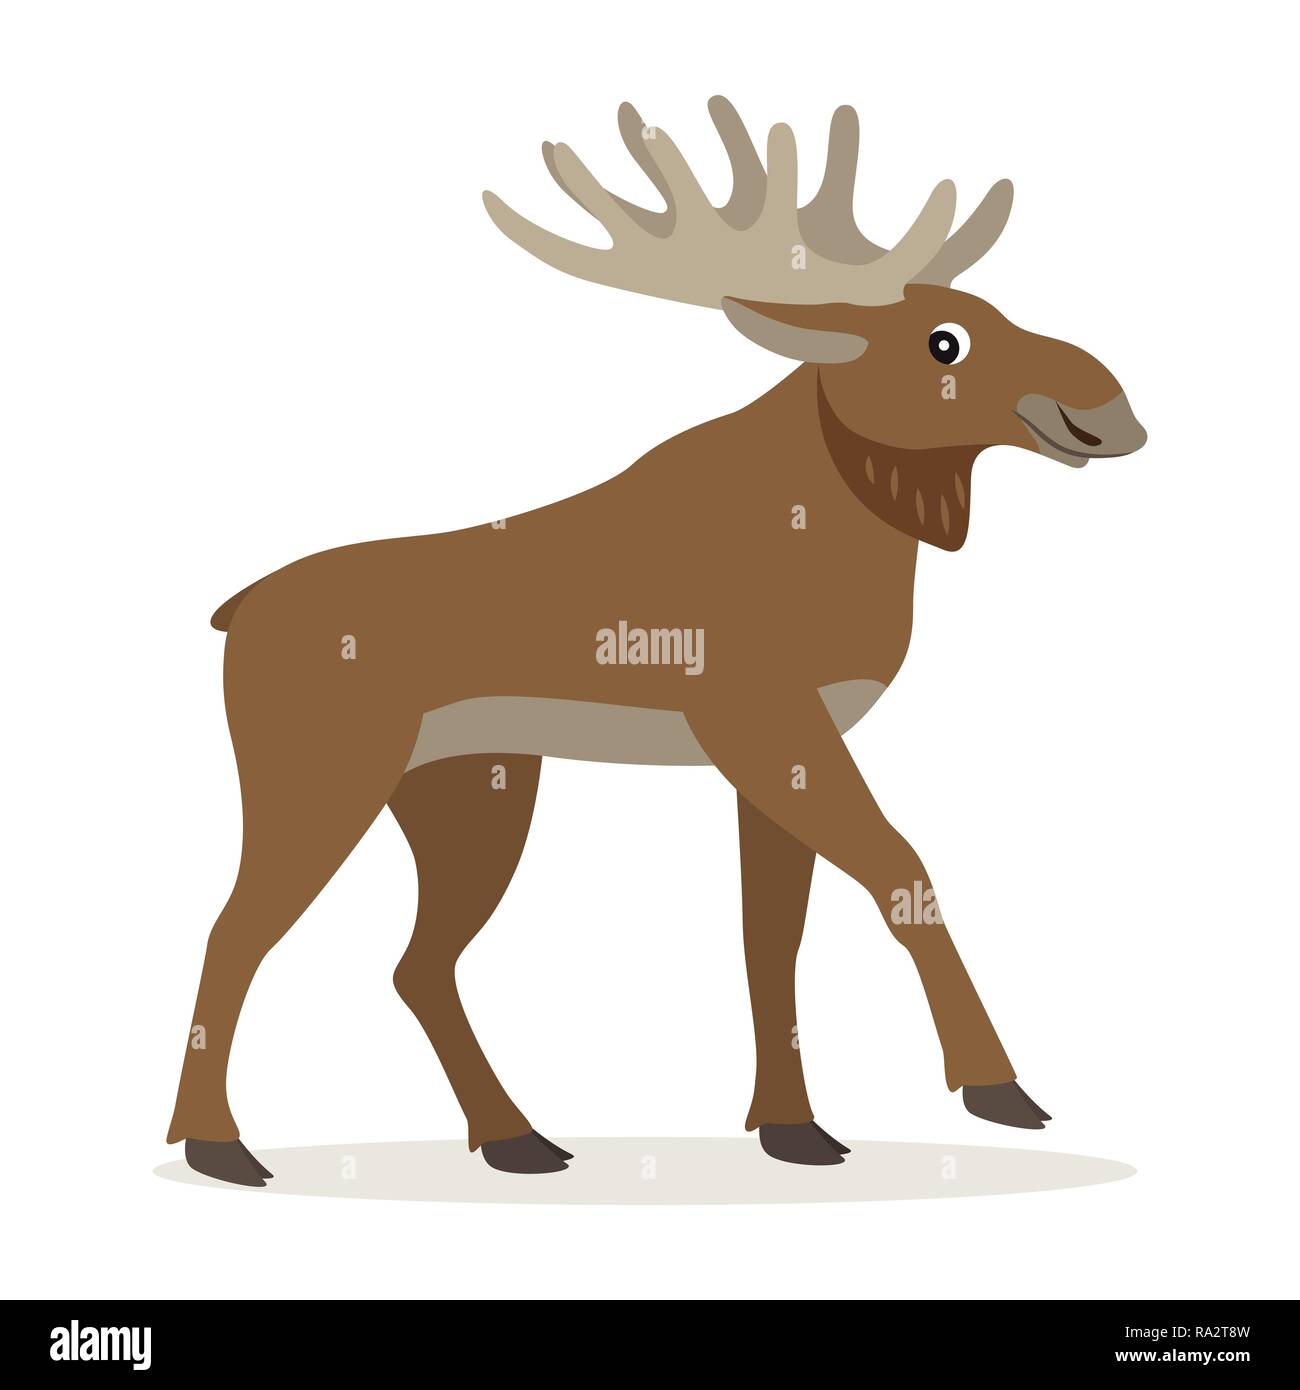 Cute forest animal, friendly moose with big horns Stock Vector